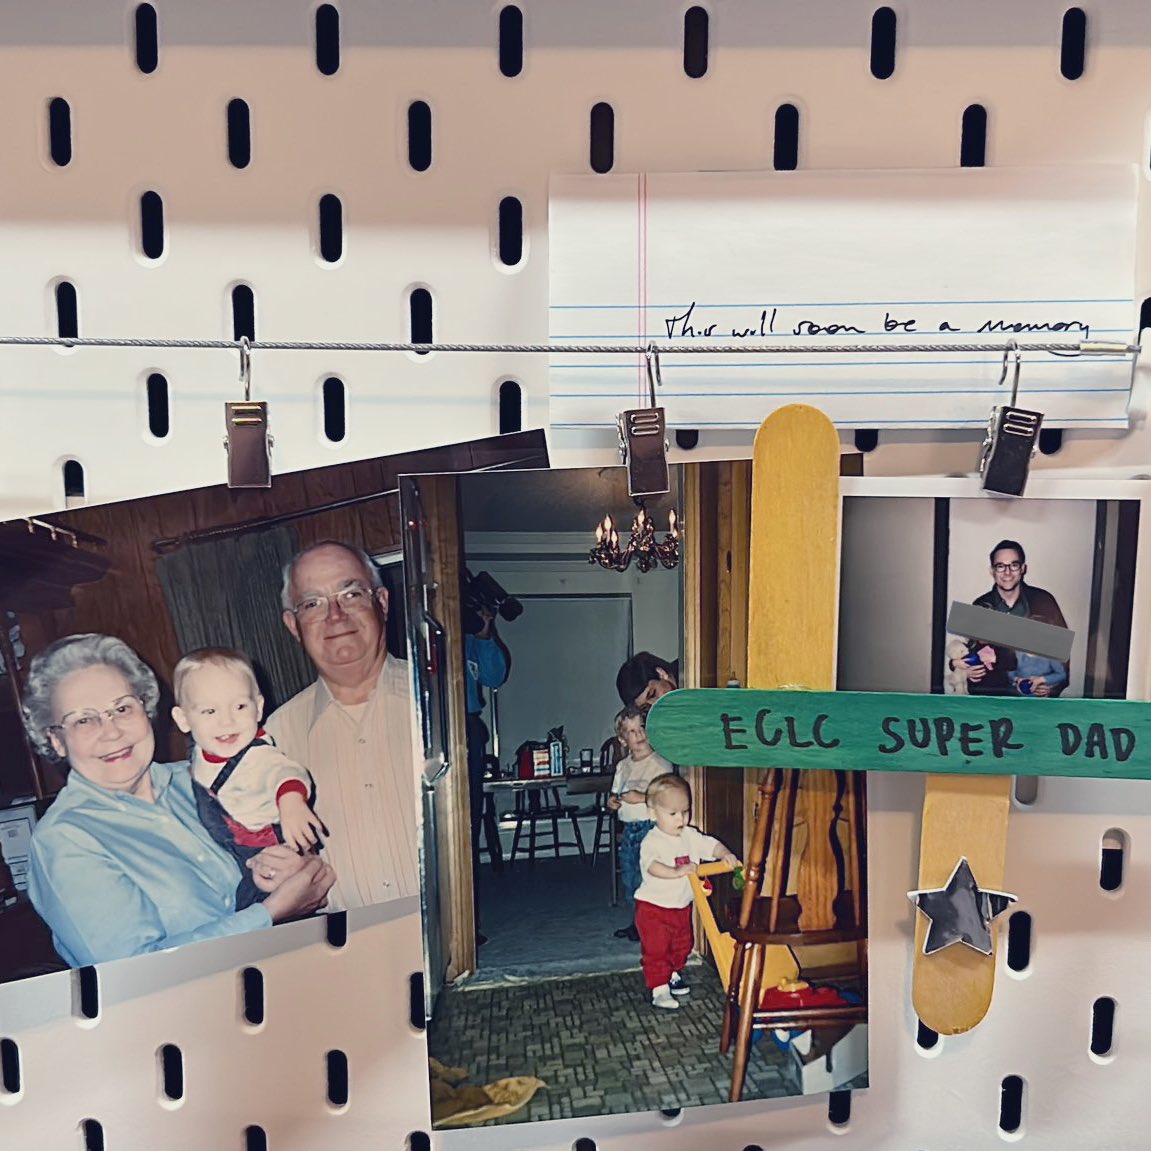 'This will soon be a memory' really stuck with me. Added it to the board. Pictures of me with my grandparents and me with my kids really drives it home 🥹